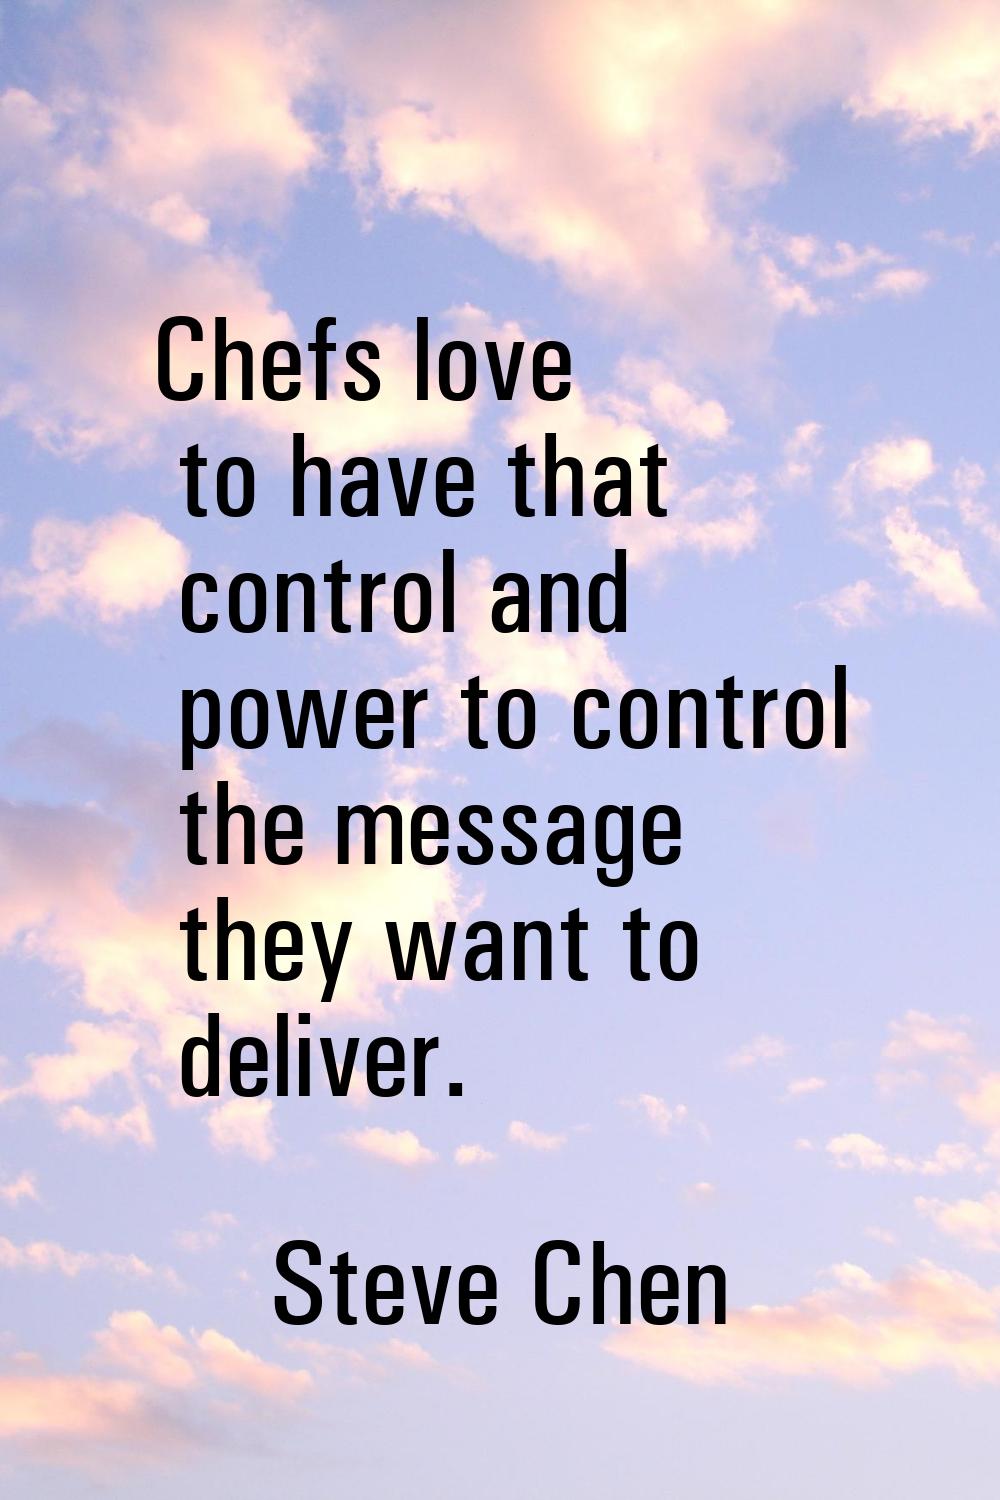 Chefs love to have that control and power to control the message they want to deliver.